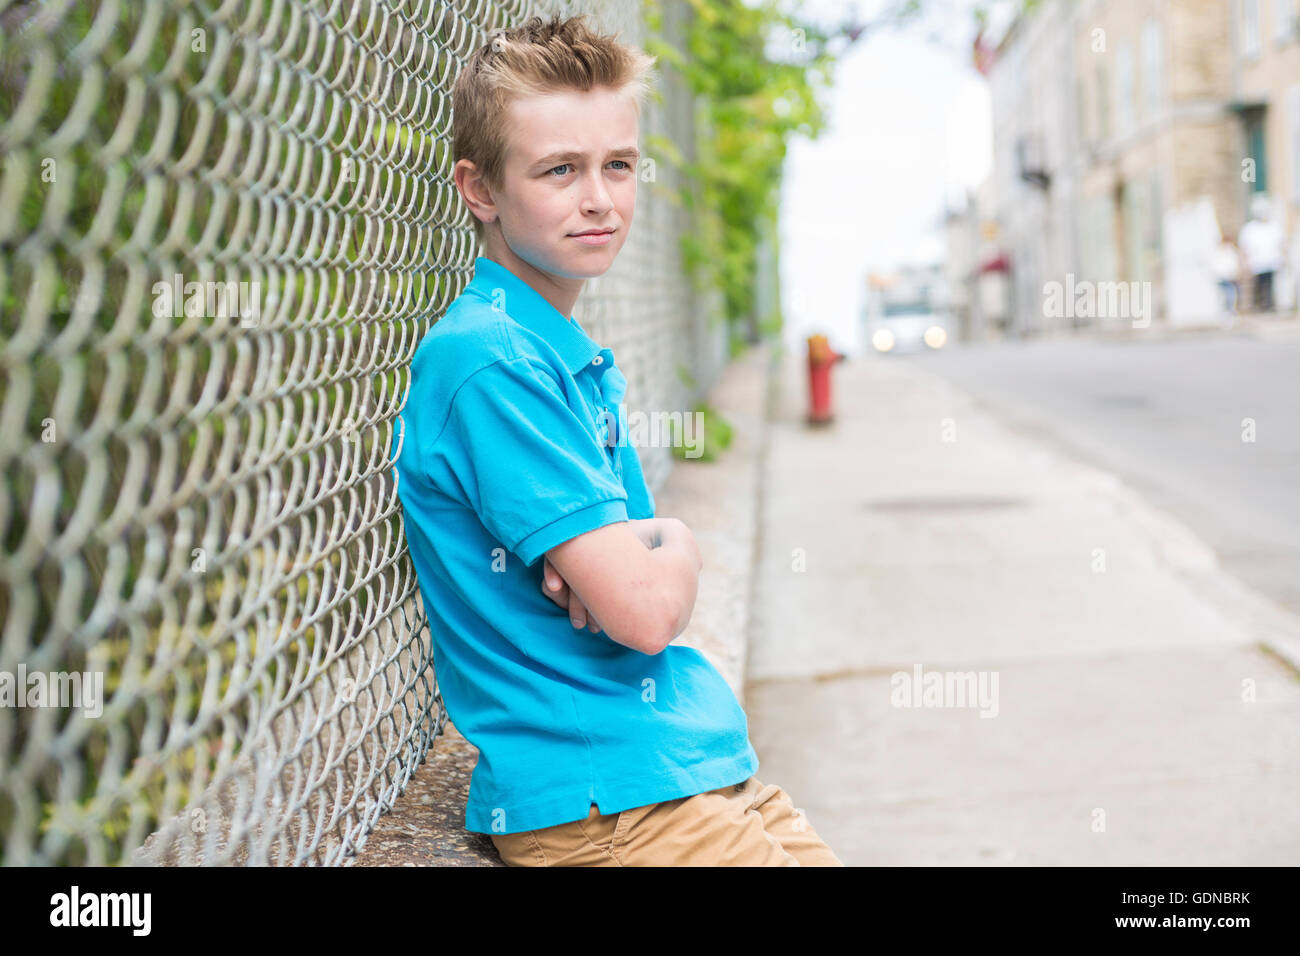 young teen boy looking out of a fence Stock Photo